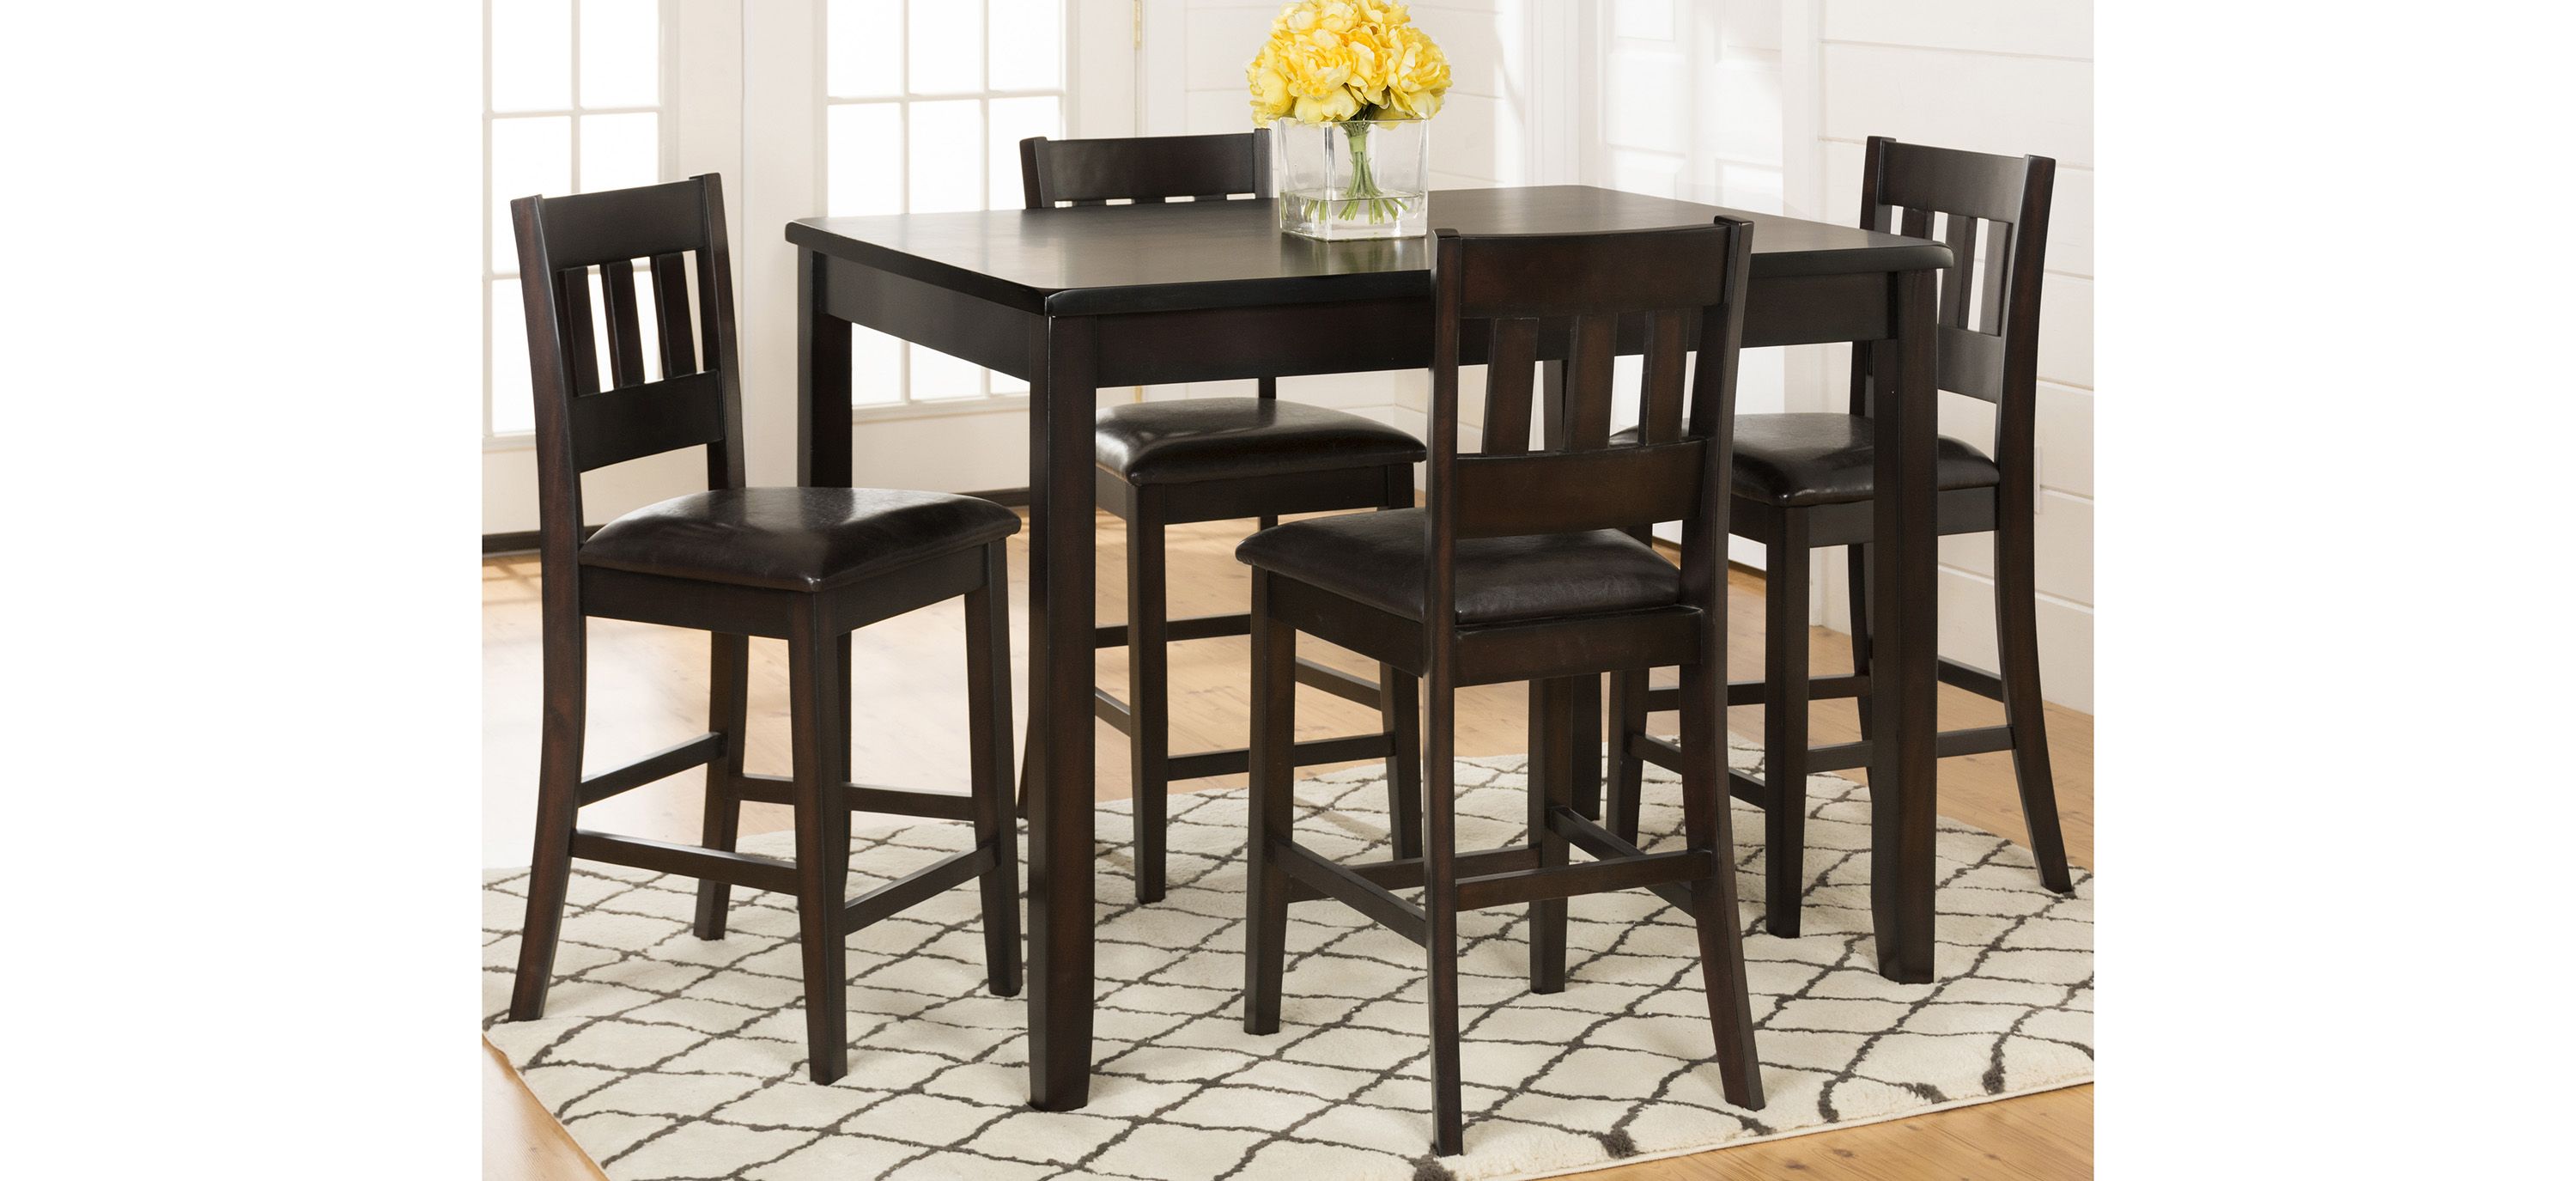 Prairie 5-pc. Counter-Height Dining Set